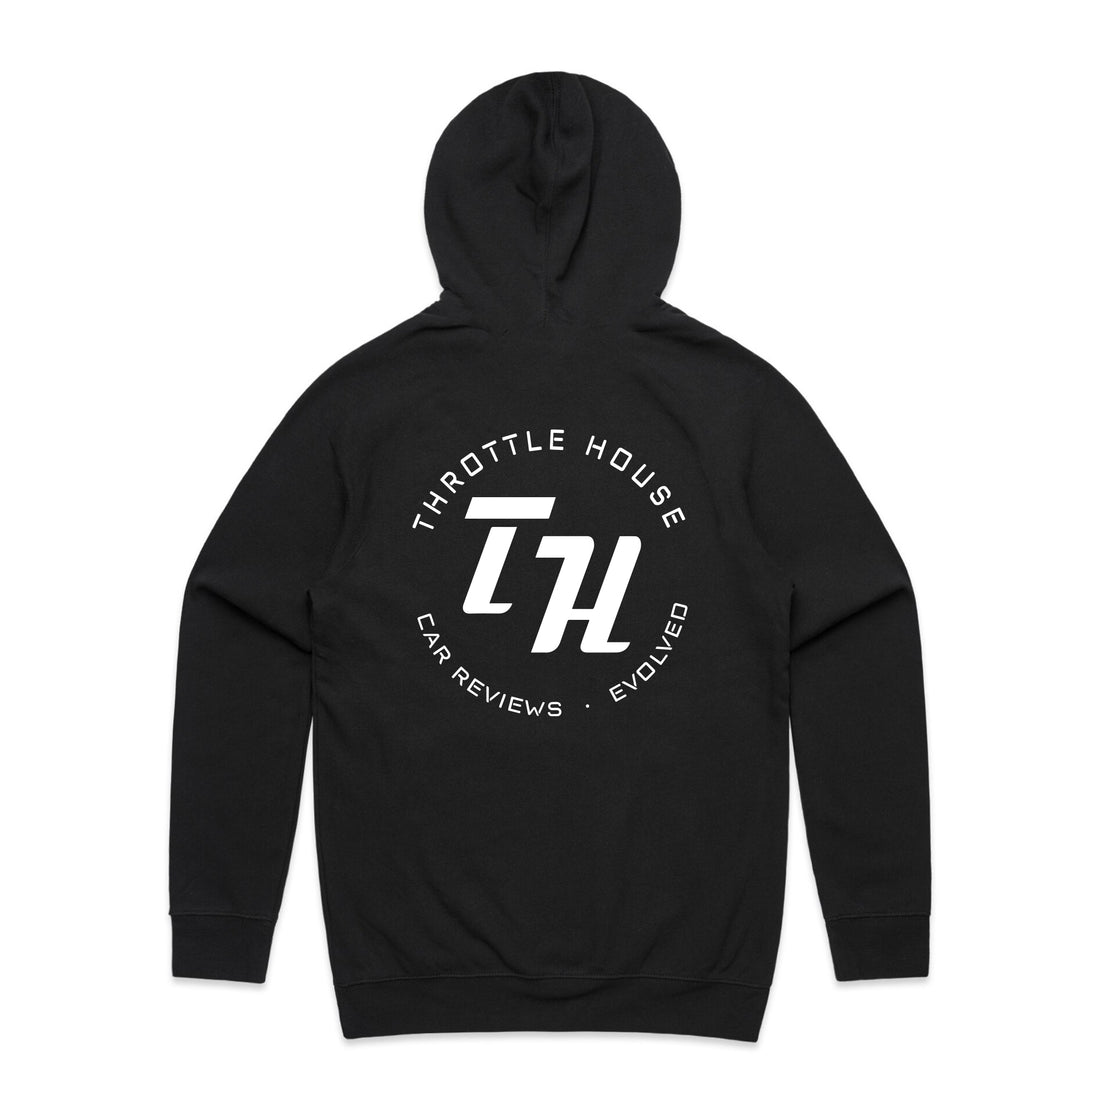 Throttle House - Car Reviews. Evolved. - Pullover Hoodie